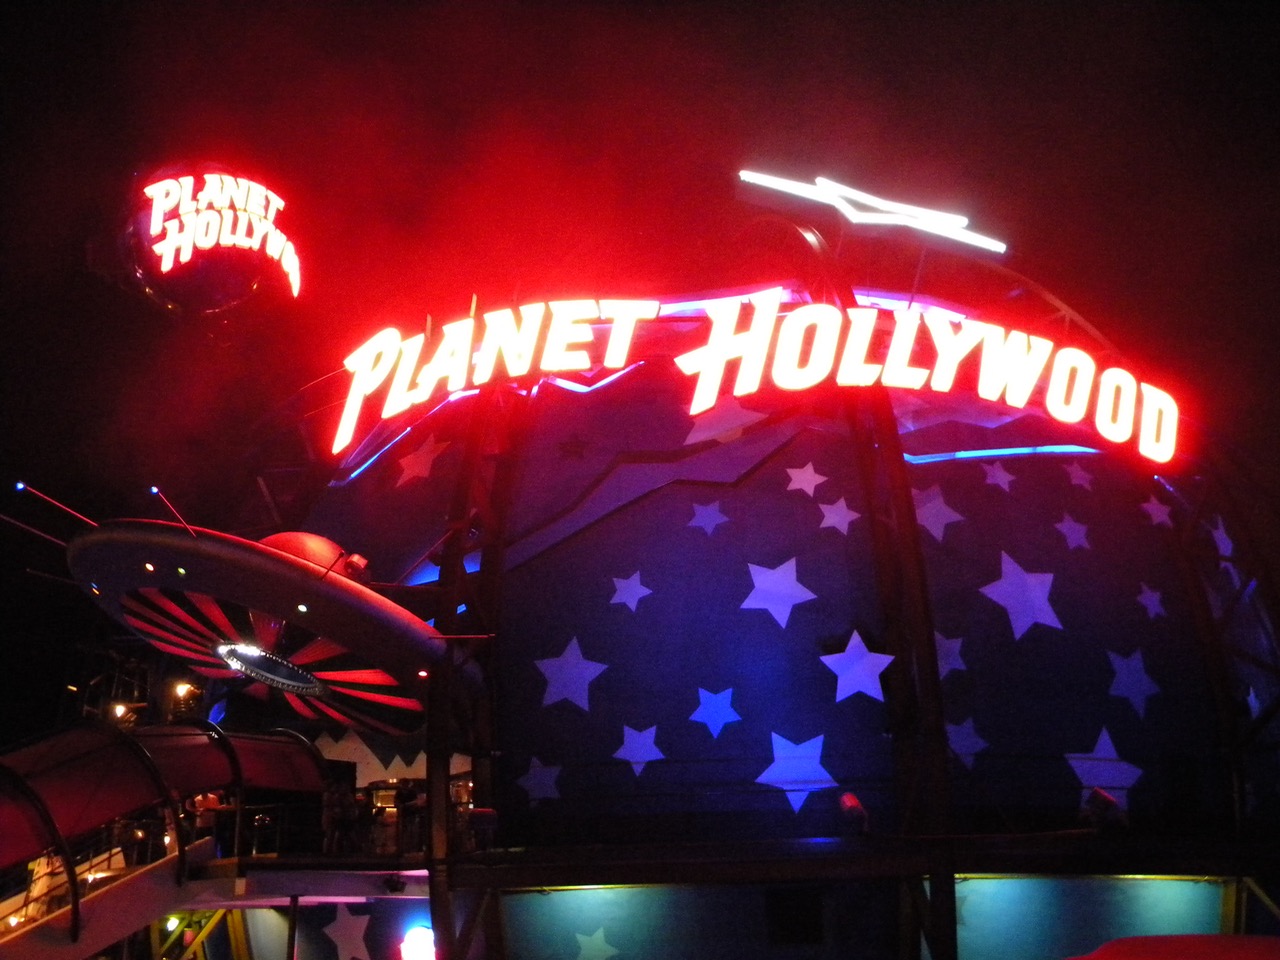 When Planet Hollywood opened, lines backed up for hours. It became the most successful restaurant and retail unit in its chain. Photo by J. Jeff Kobrer.